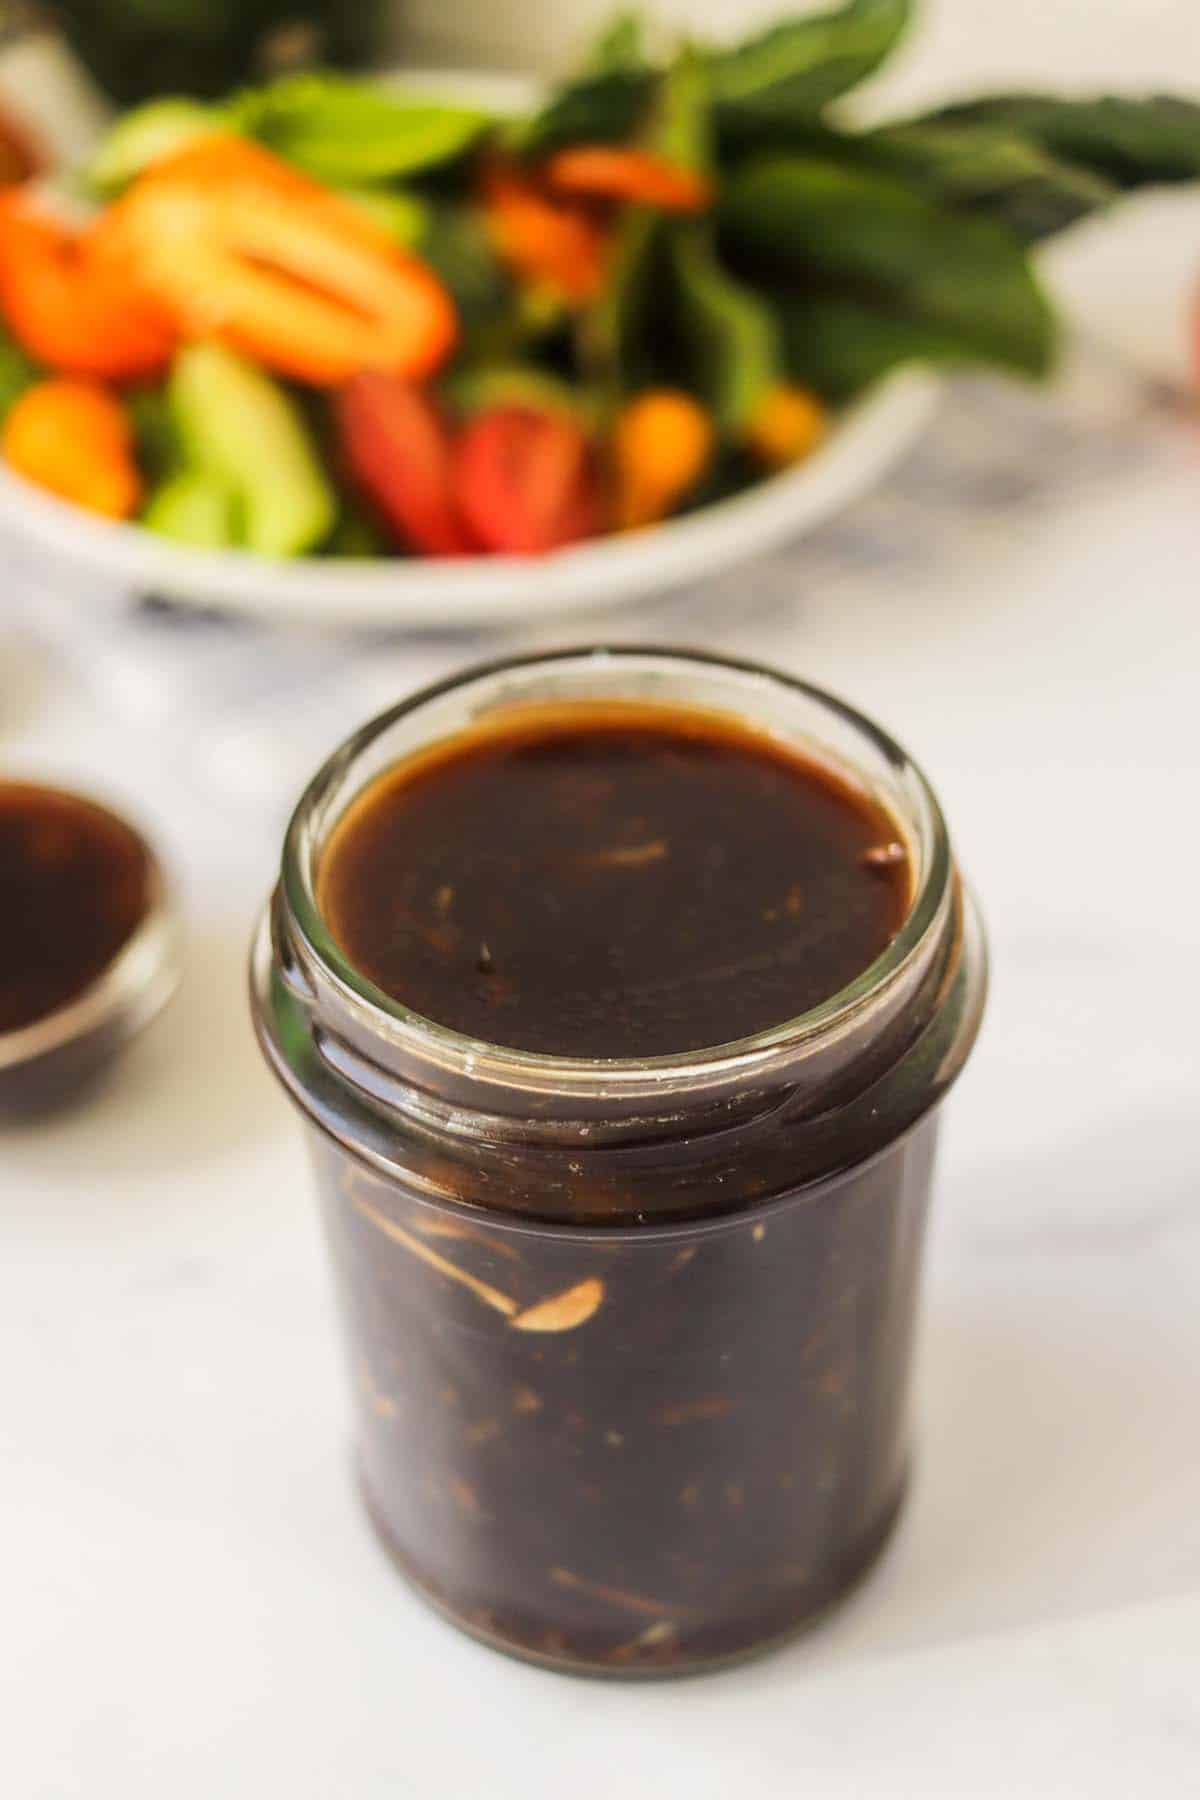 Sauce in a jar in front of a plate of vegetables.